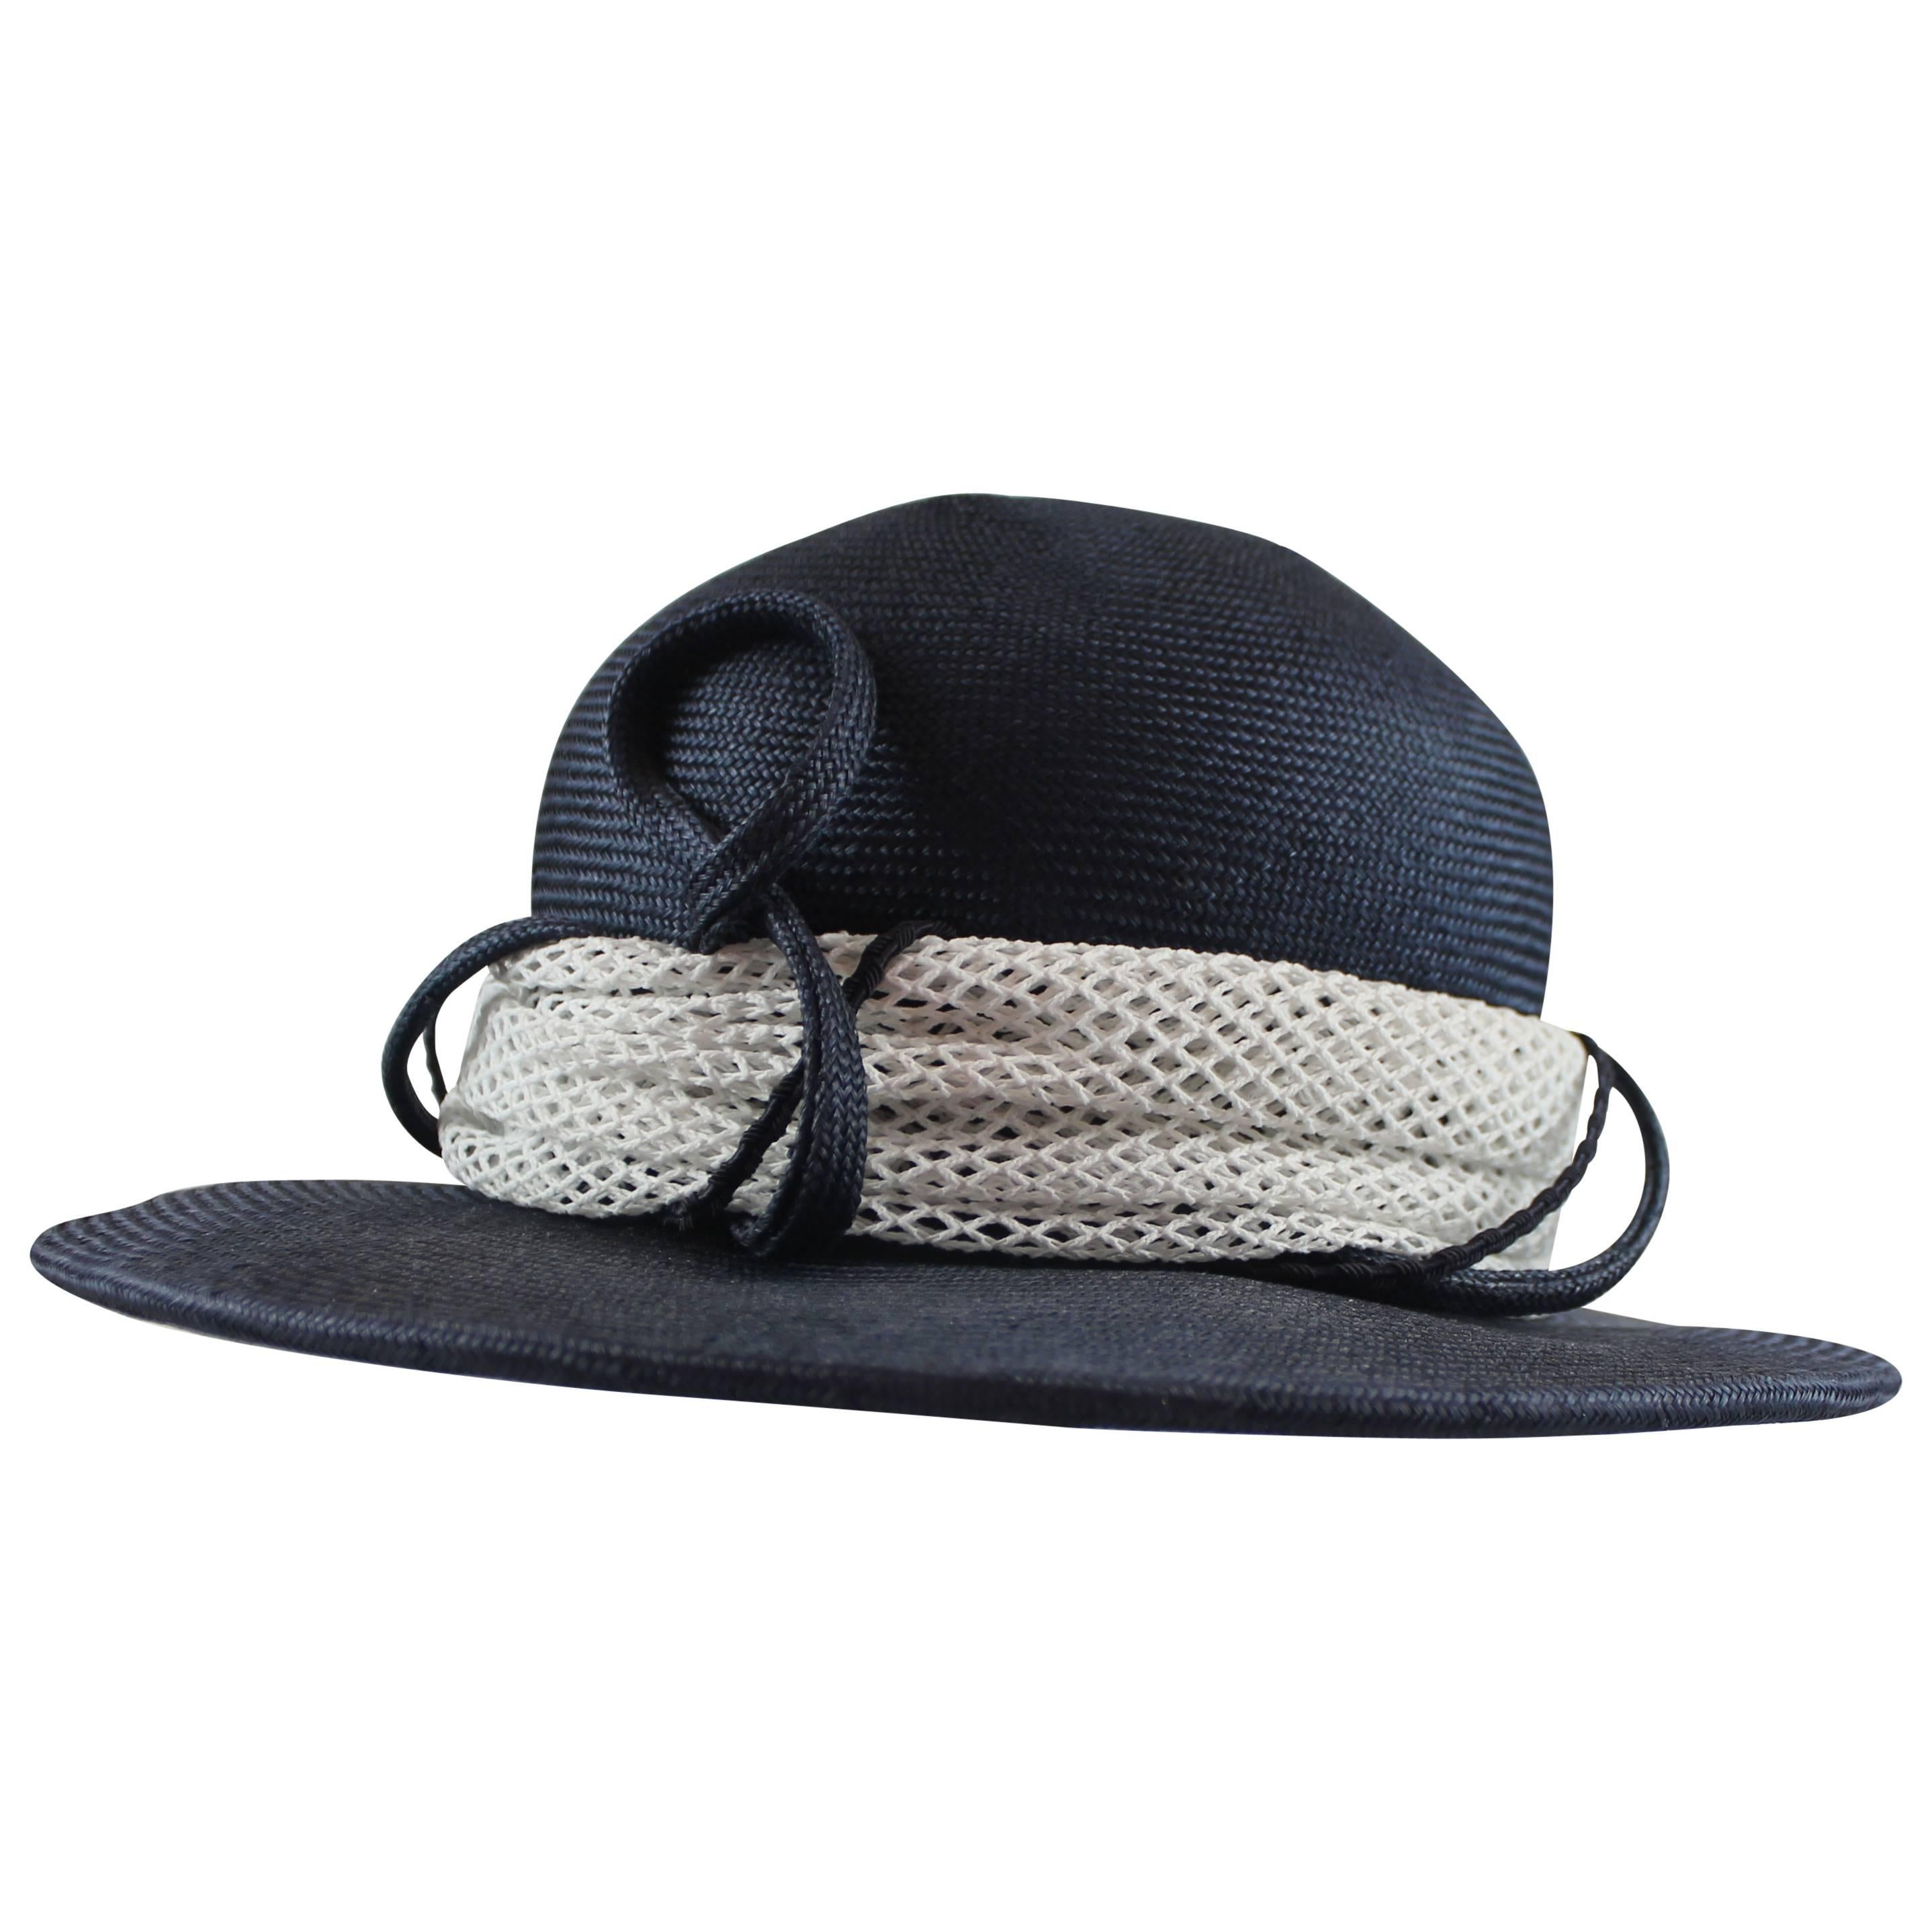 Suzanne Custom Millinery Navy and White Straw Hat with Ribbon